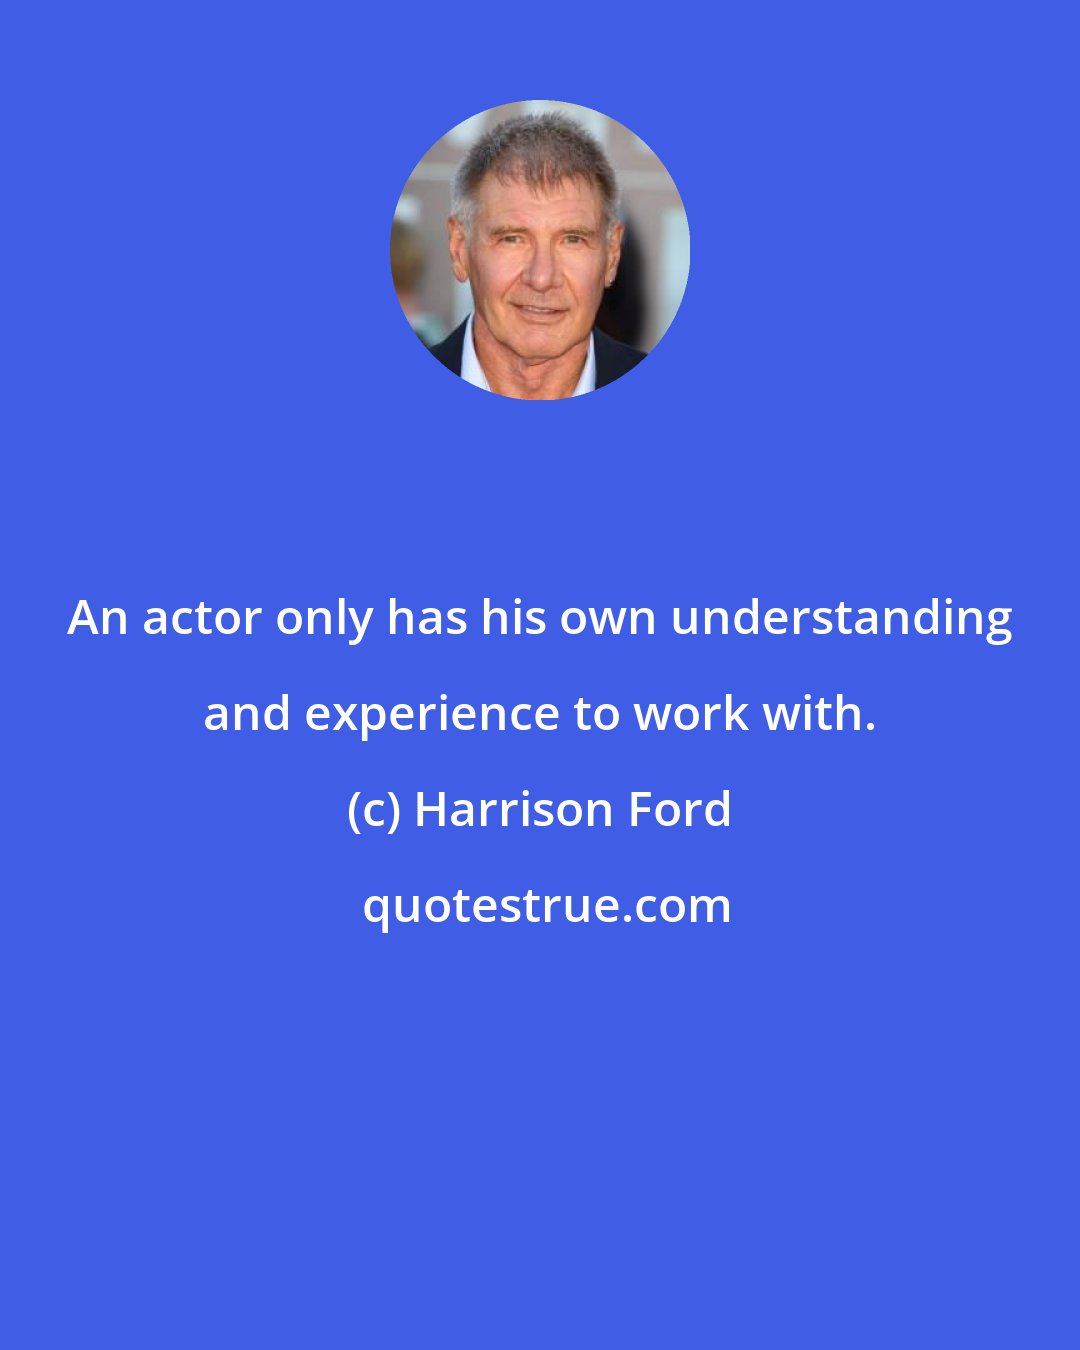 Harrison Ford: An actor only has his own understanding and experience to work with.